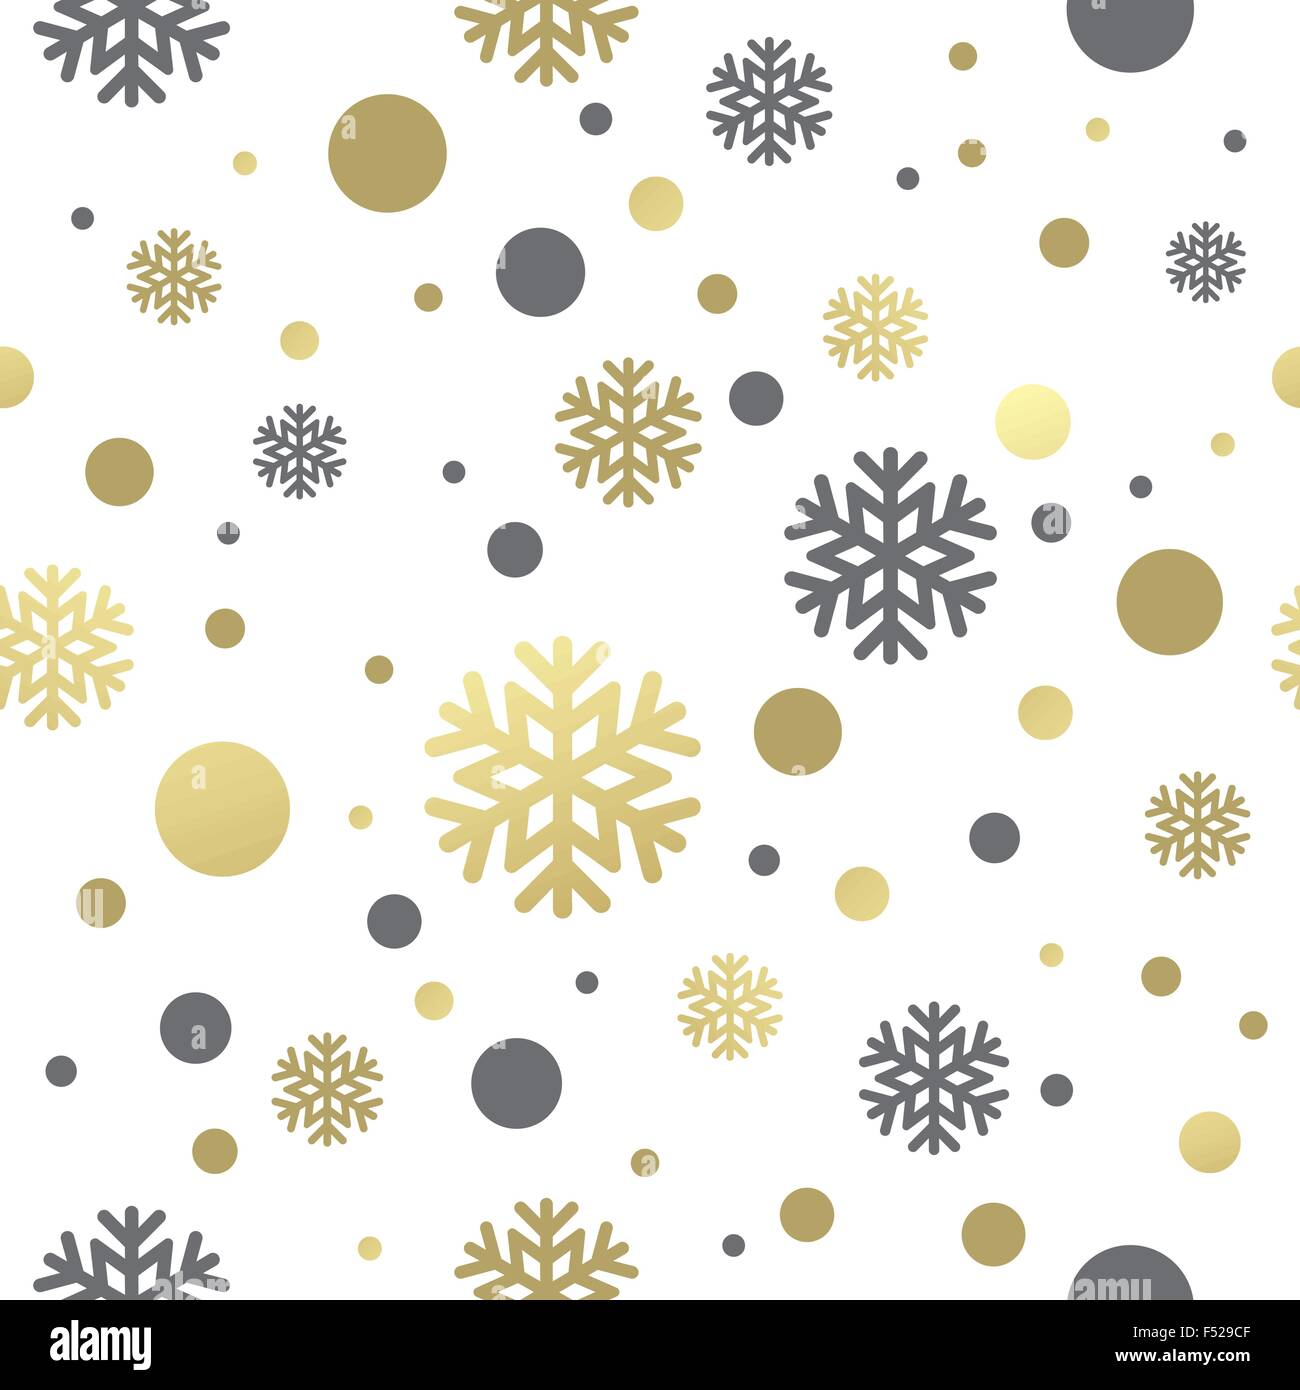 Free download Seamless white christmas wallpaper with black and golden ...